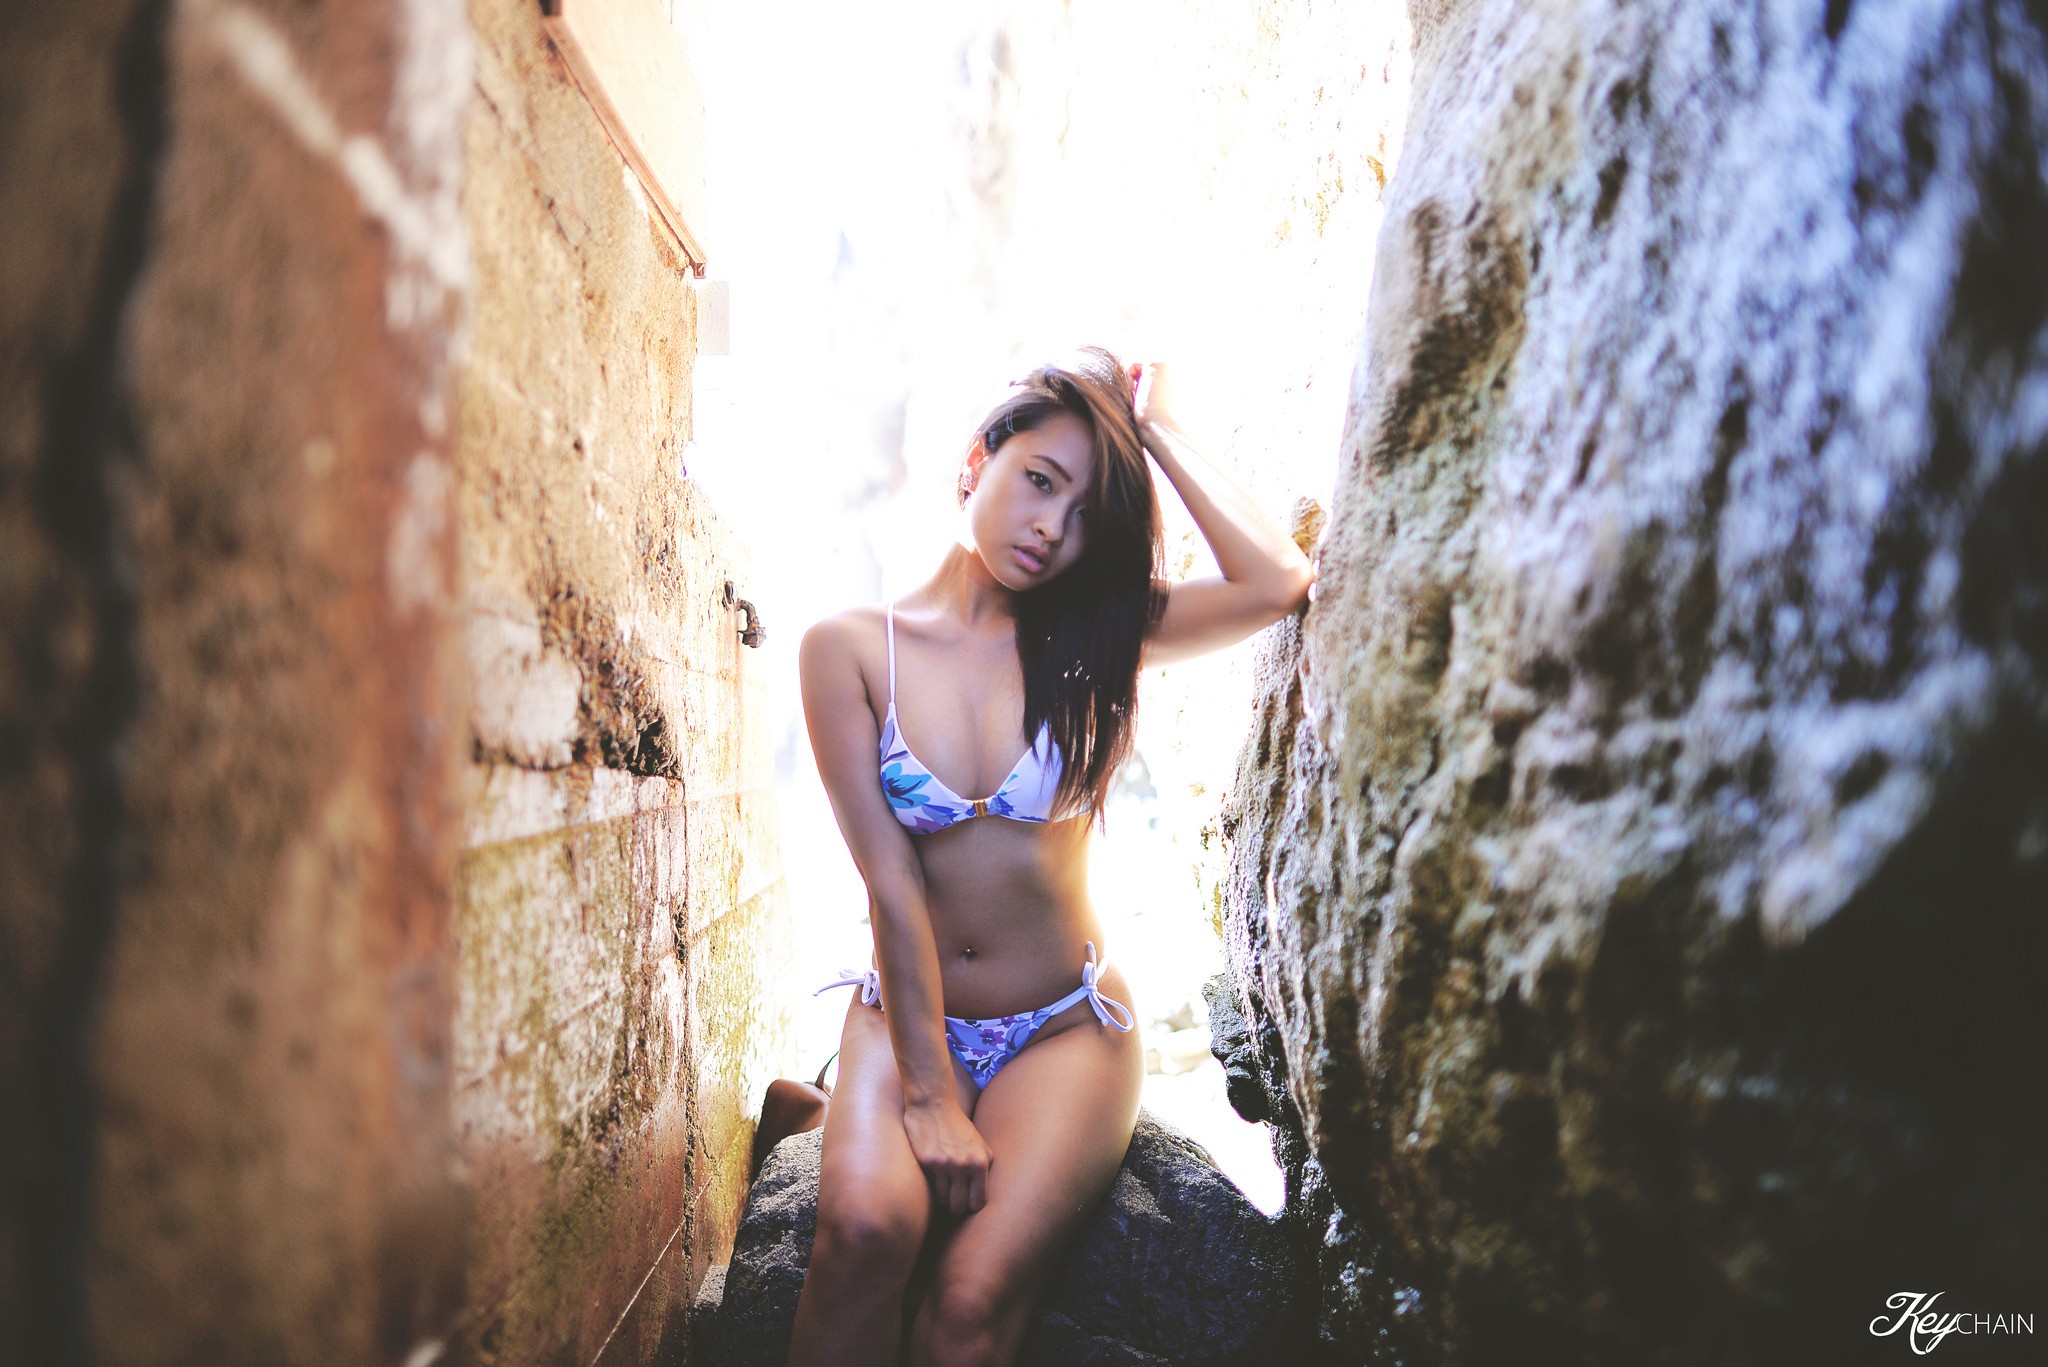 People 2048x1367 Christy Truong women Asian model bikini brunette pierced navel sitting hands on head wall rocks looking at viewer women outdoors belly arms up outdoors